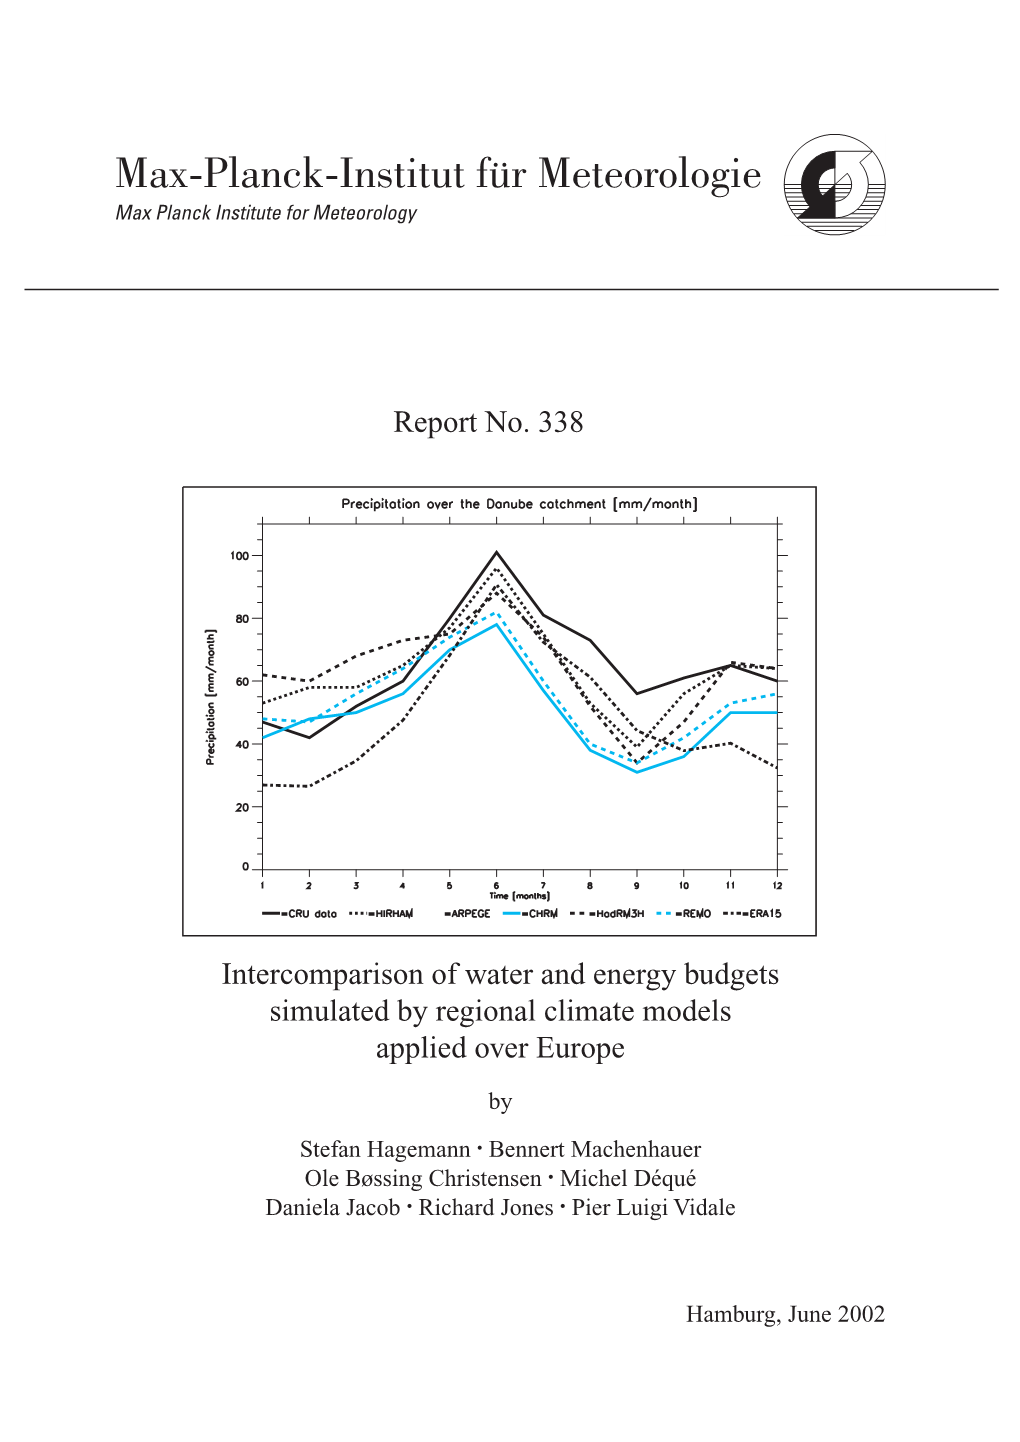 Intercomparison of Water and Energy Budgets Simulated by Regional Climate Models Applied Over Europe